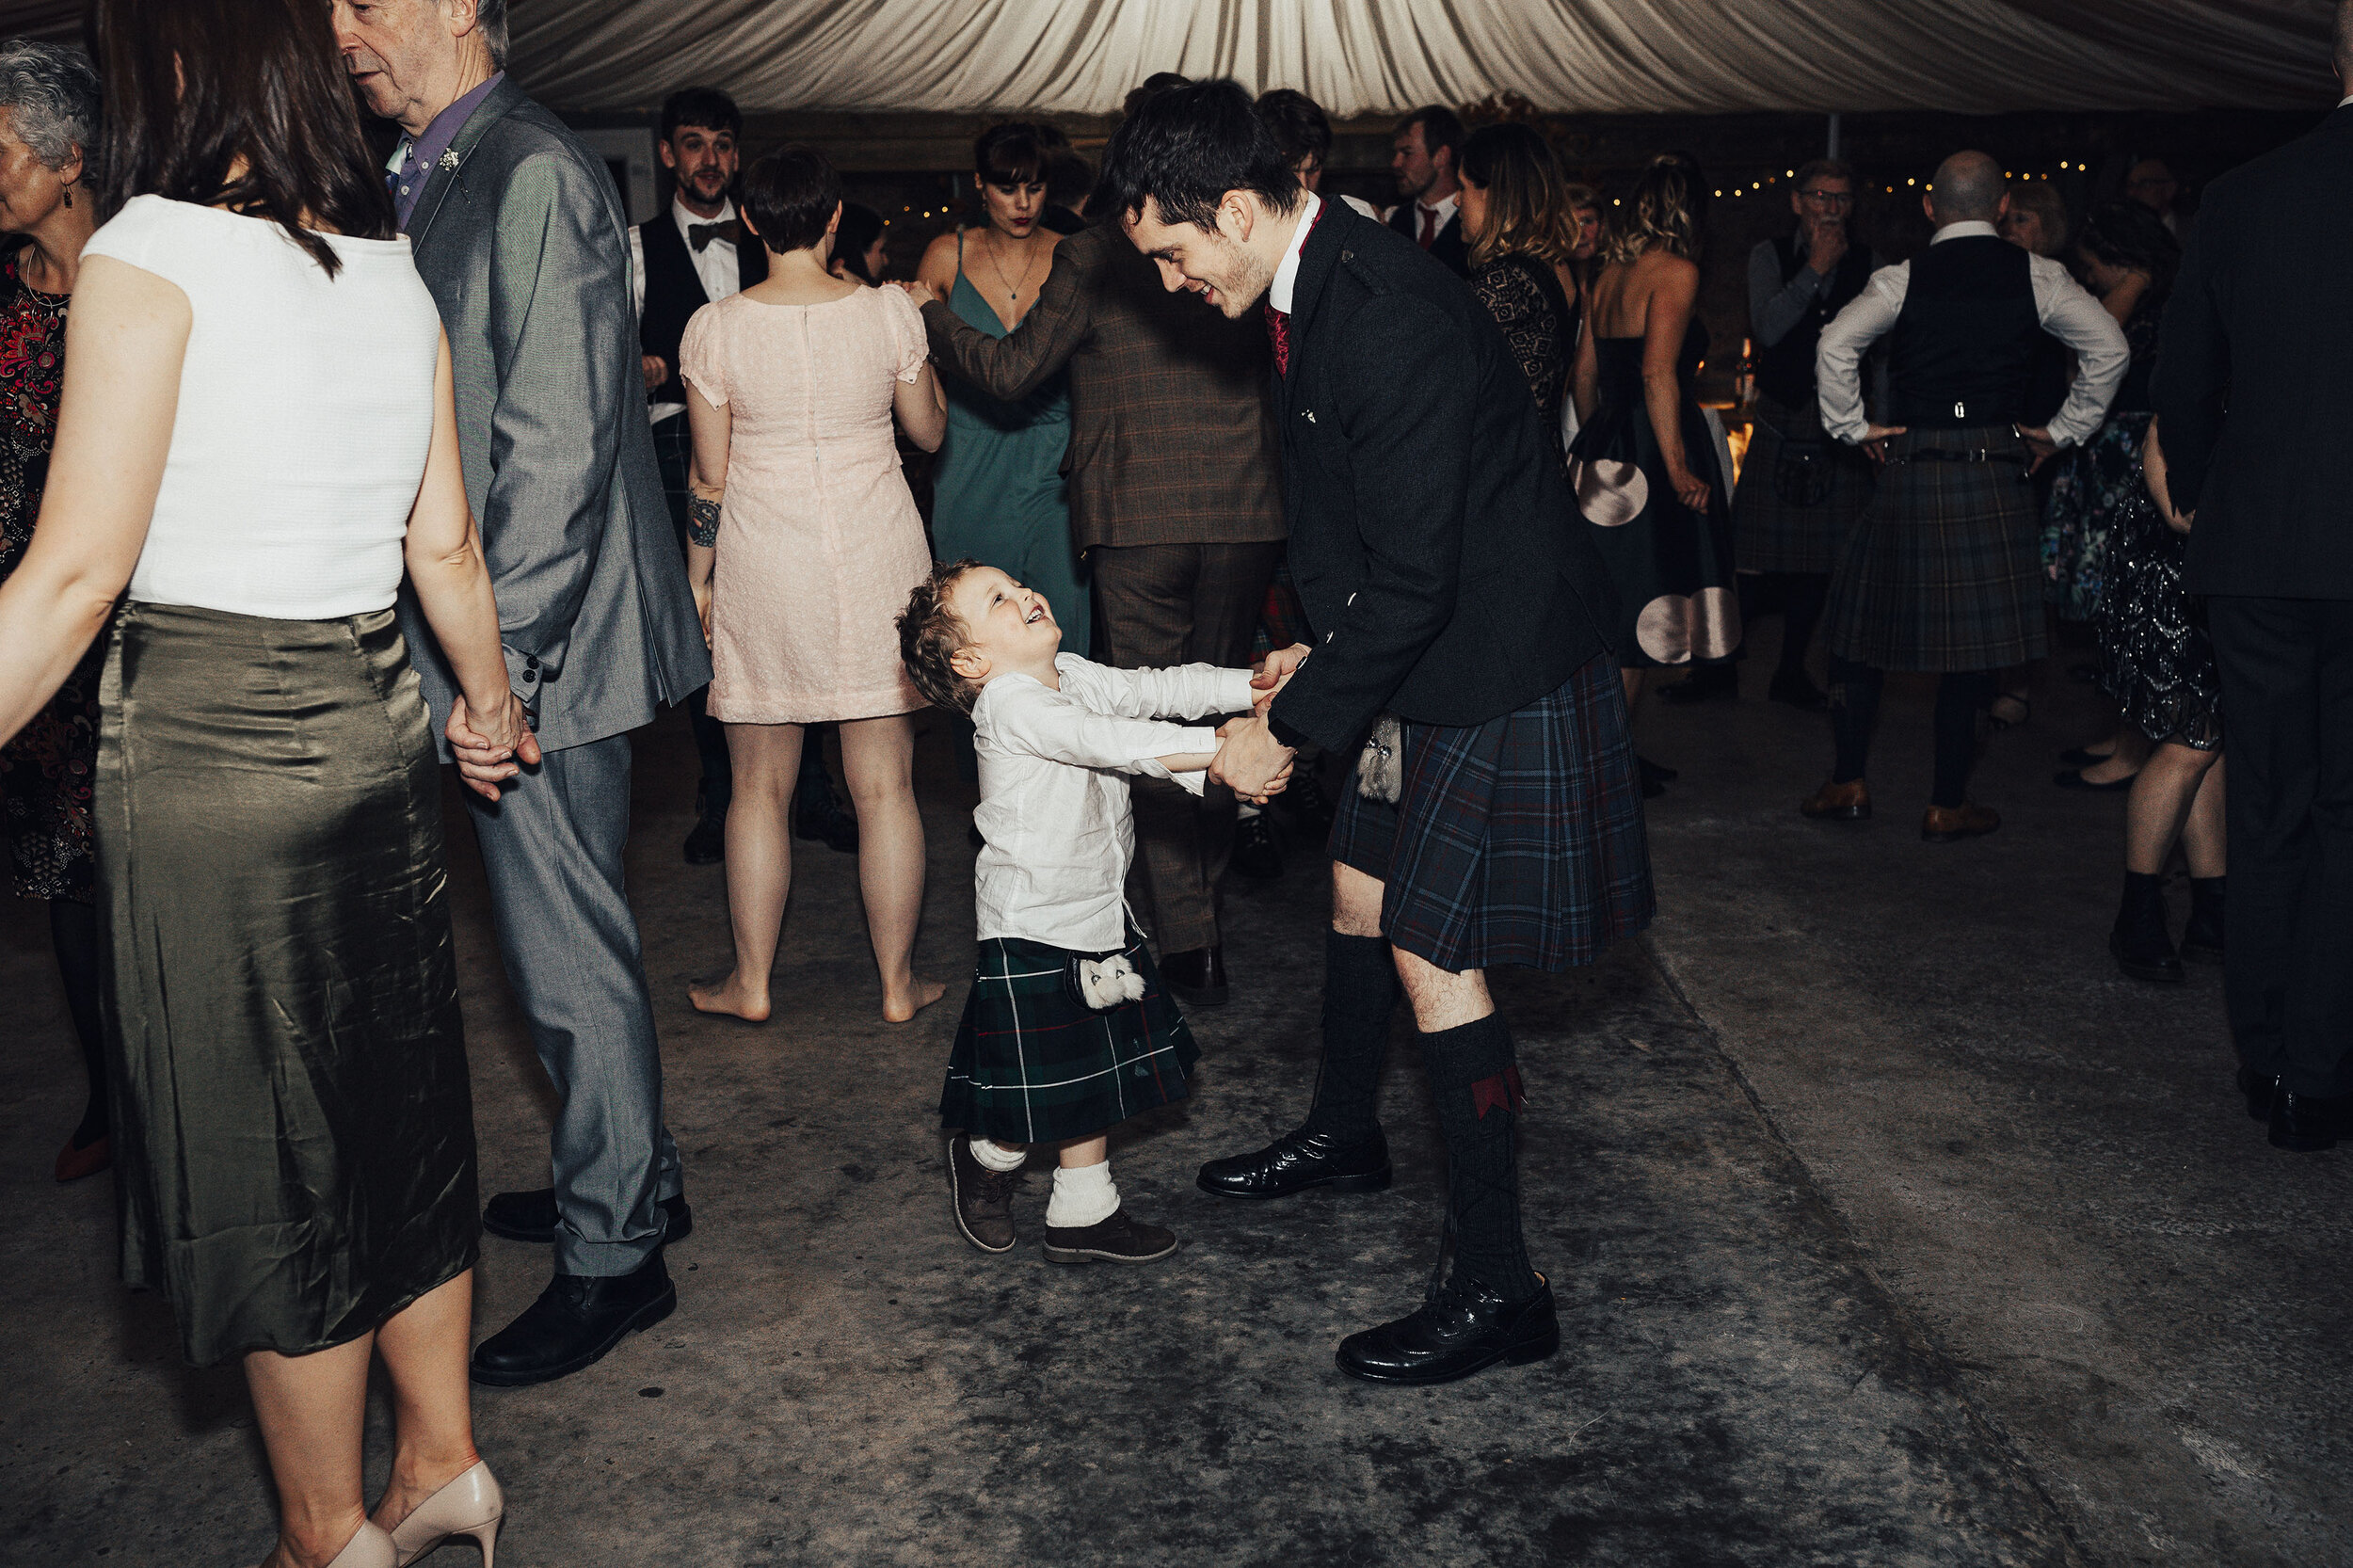 COW_SHED_CRAIL_WEDDING_PJ_PHILLIPS_PHOTOGRAPHY_186.jpg